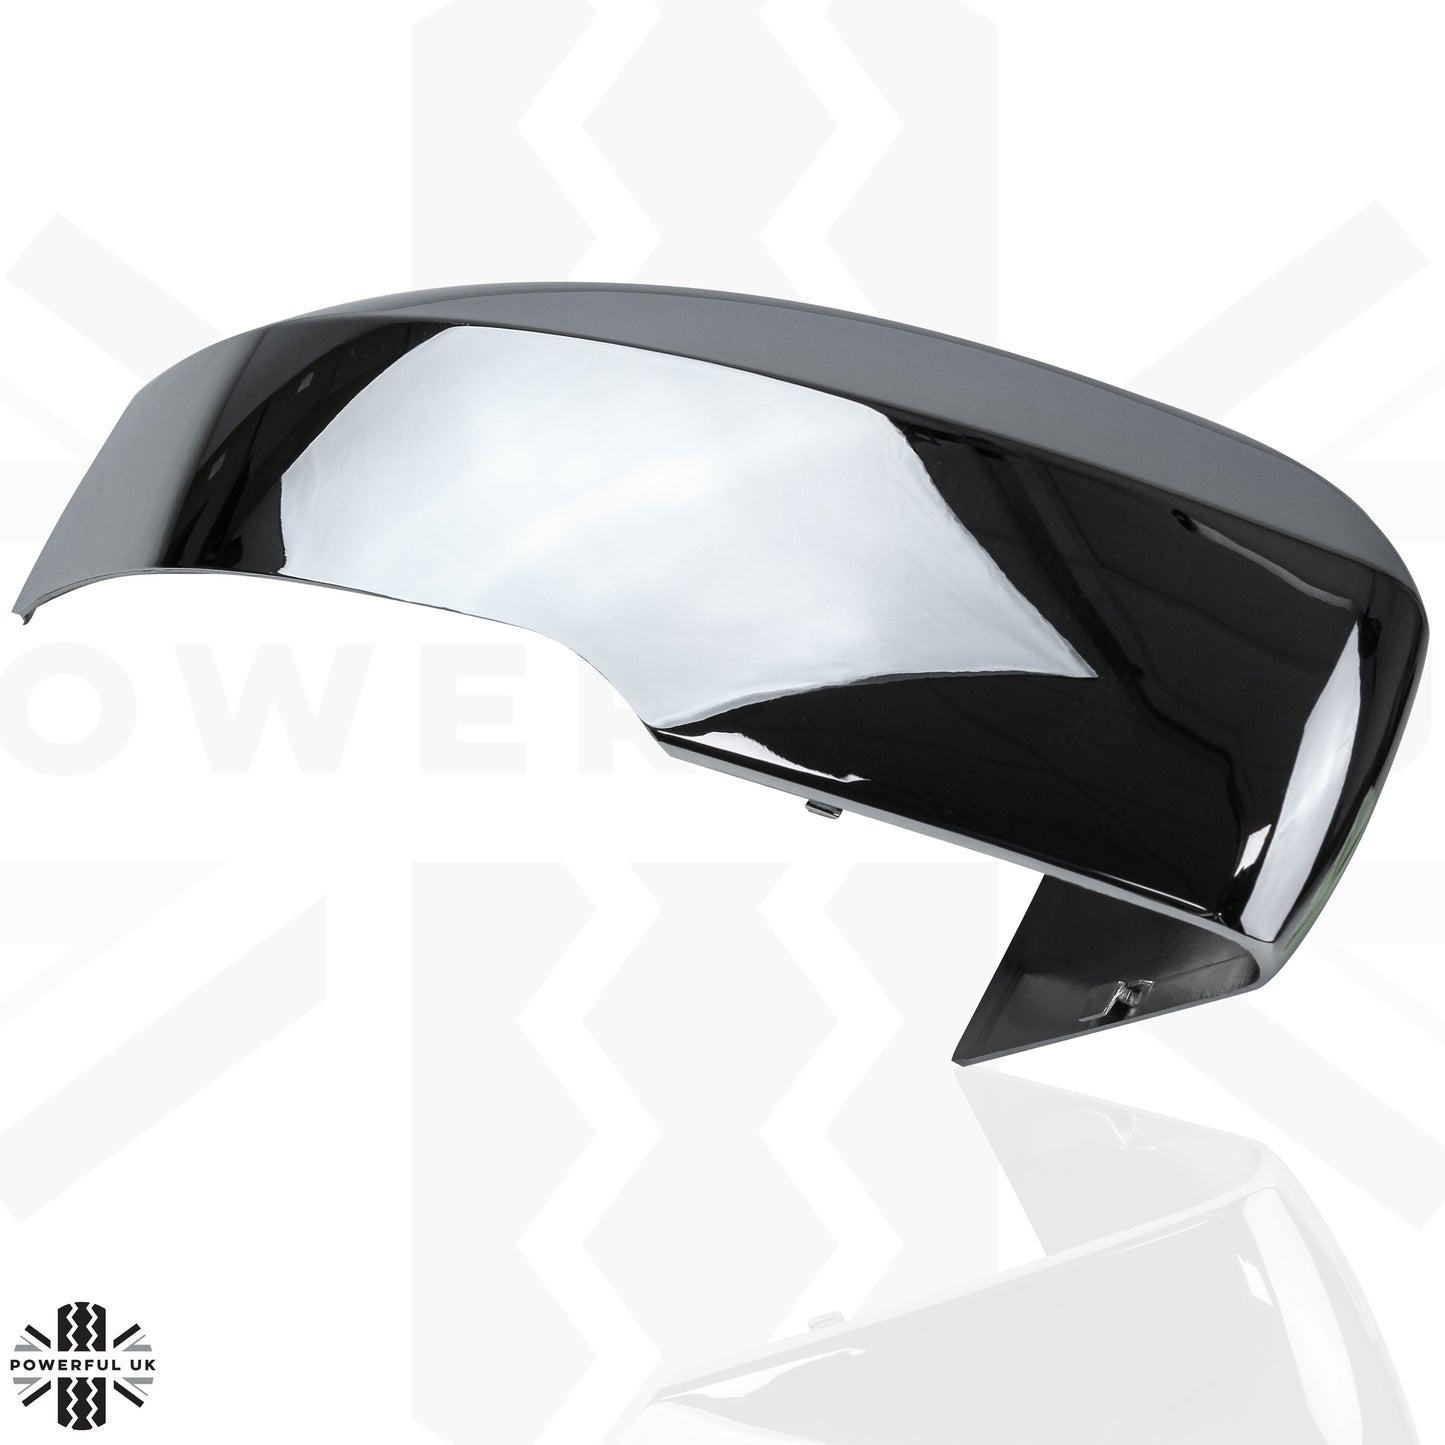 Genuine Mirror Covers - Top Half Caps for Land Rover Discovery 5 - Chrome